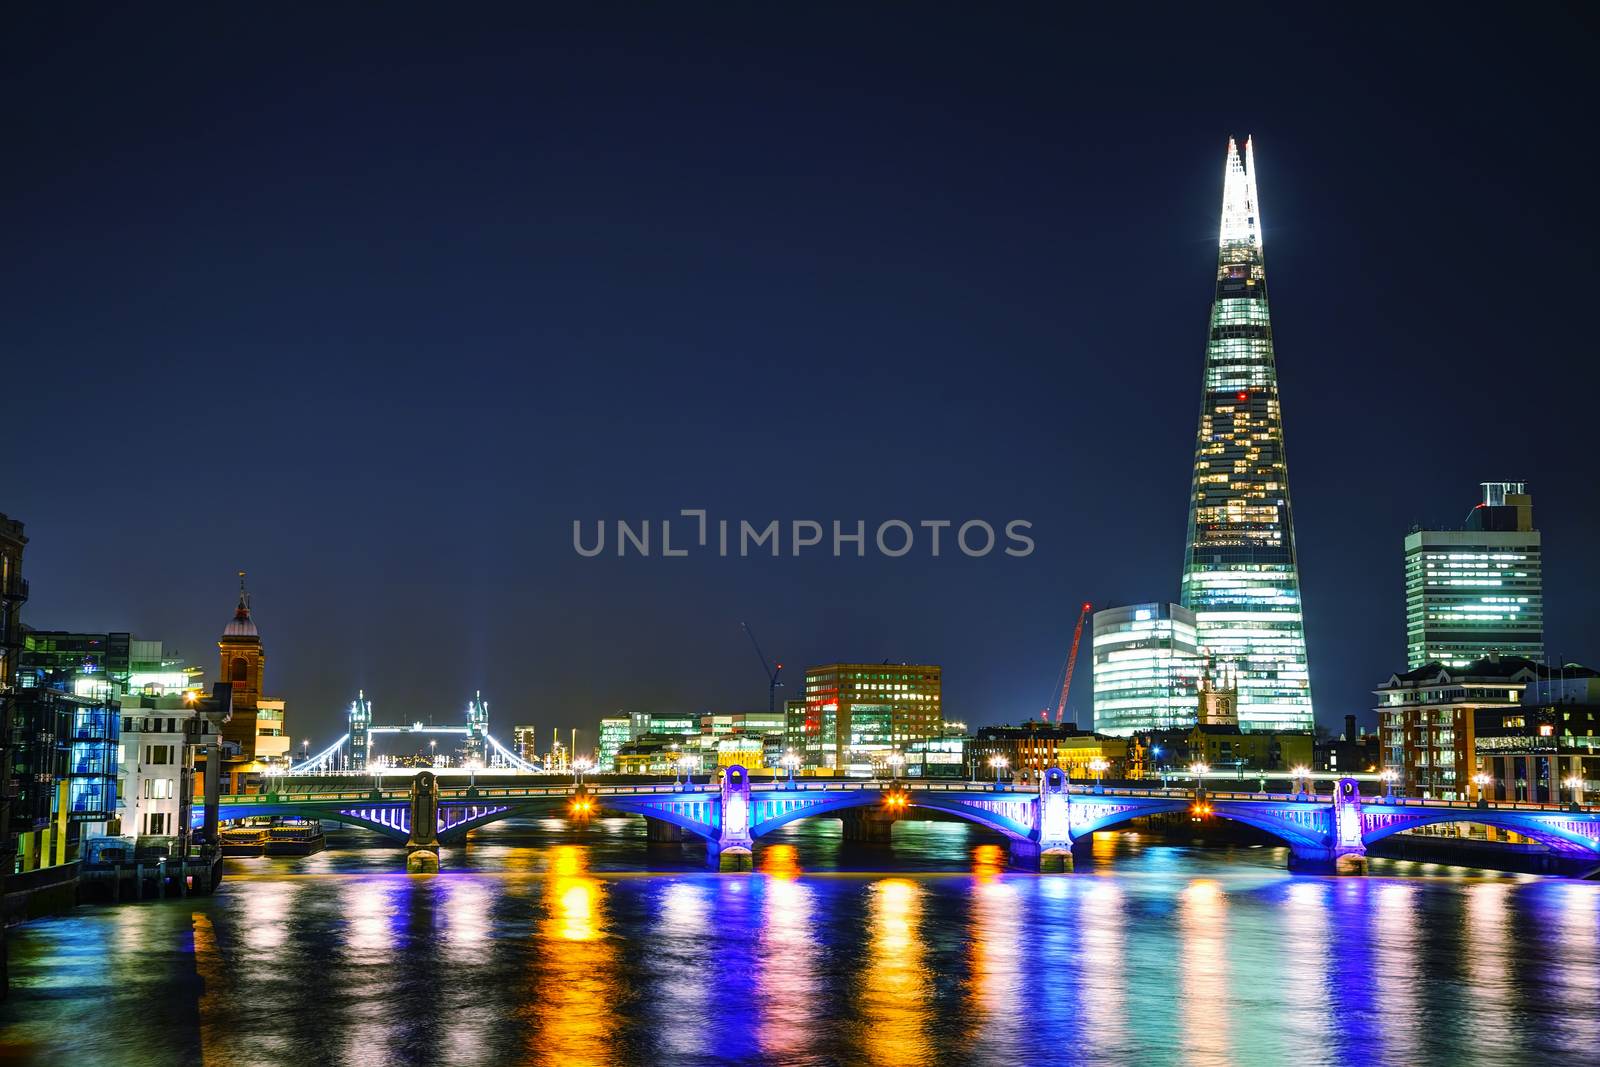 LONDON - APRIL 4: Overview of London with the Shard of Glass on April 4, 2015 in London, UK. Standing 306 metres high, the Shard is currently the tallest building in the European Union.